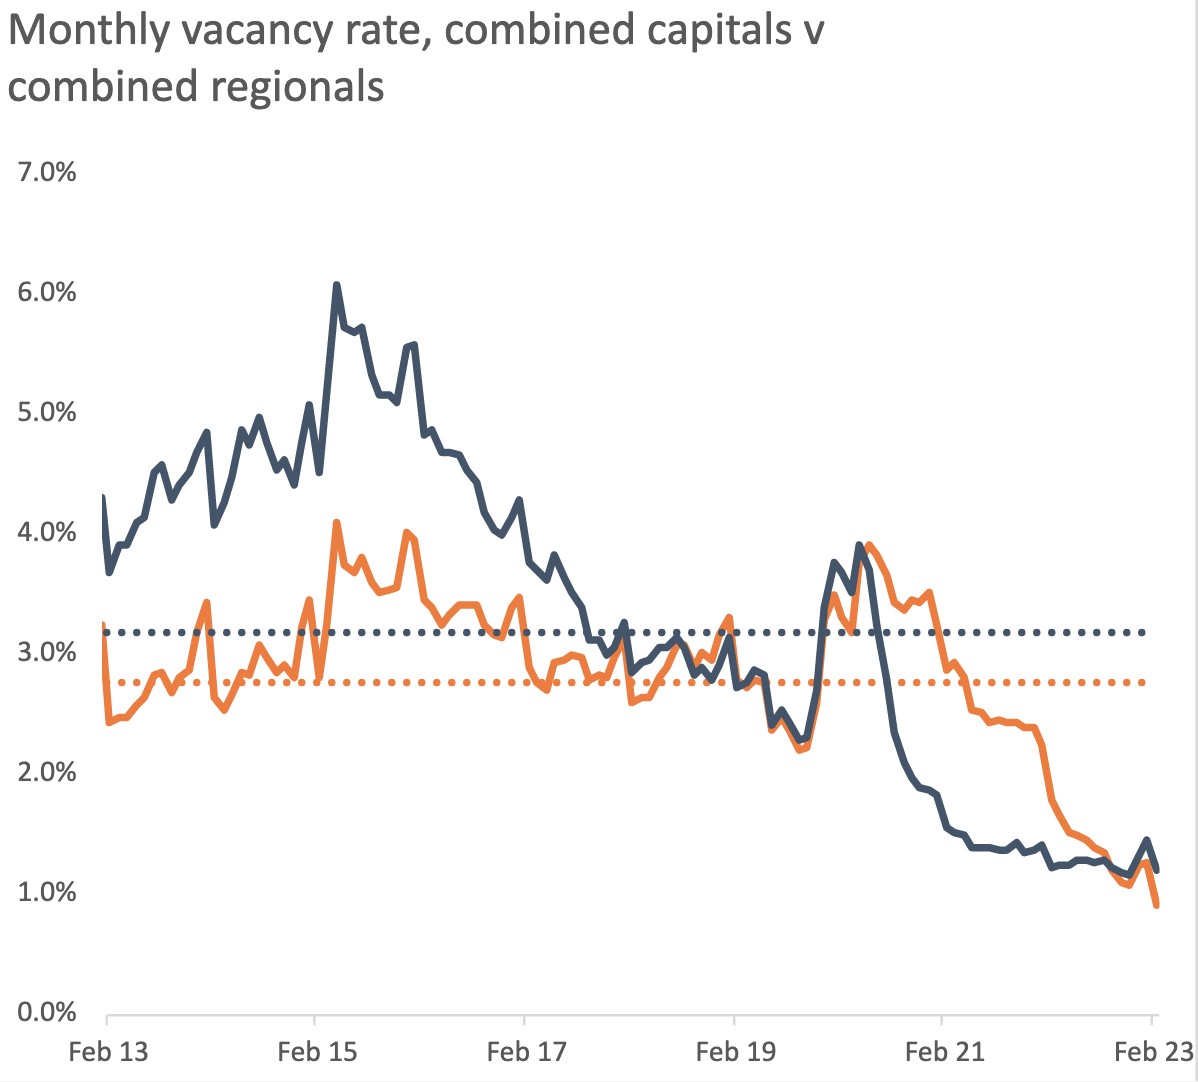 A line chart graphs the monthly vacancy rates for capital versus regional cities